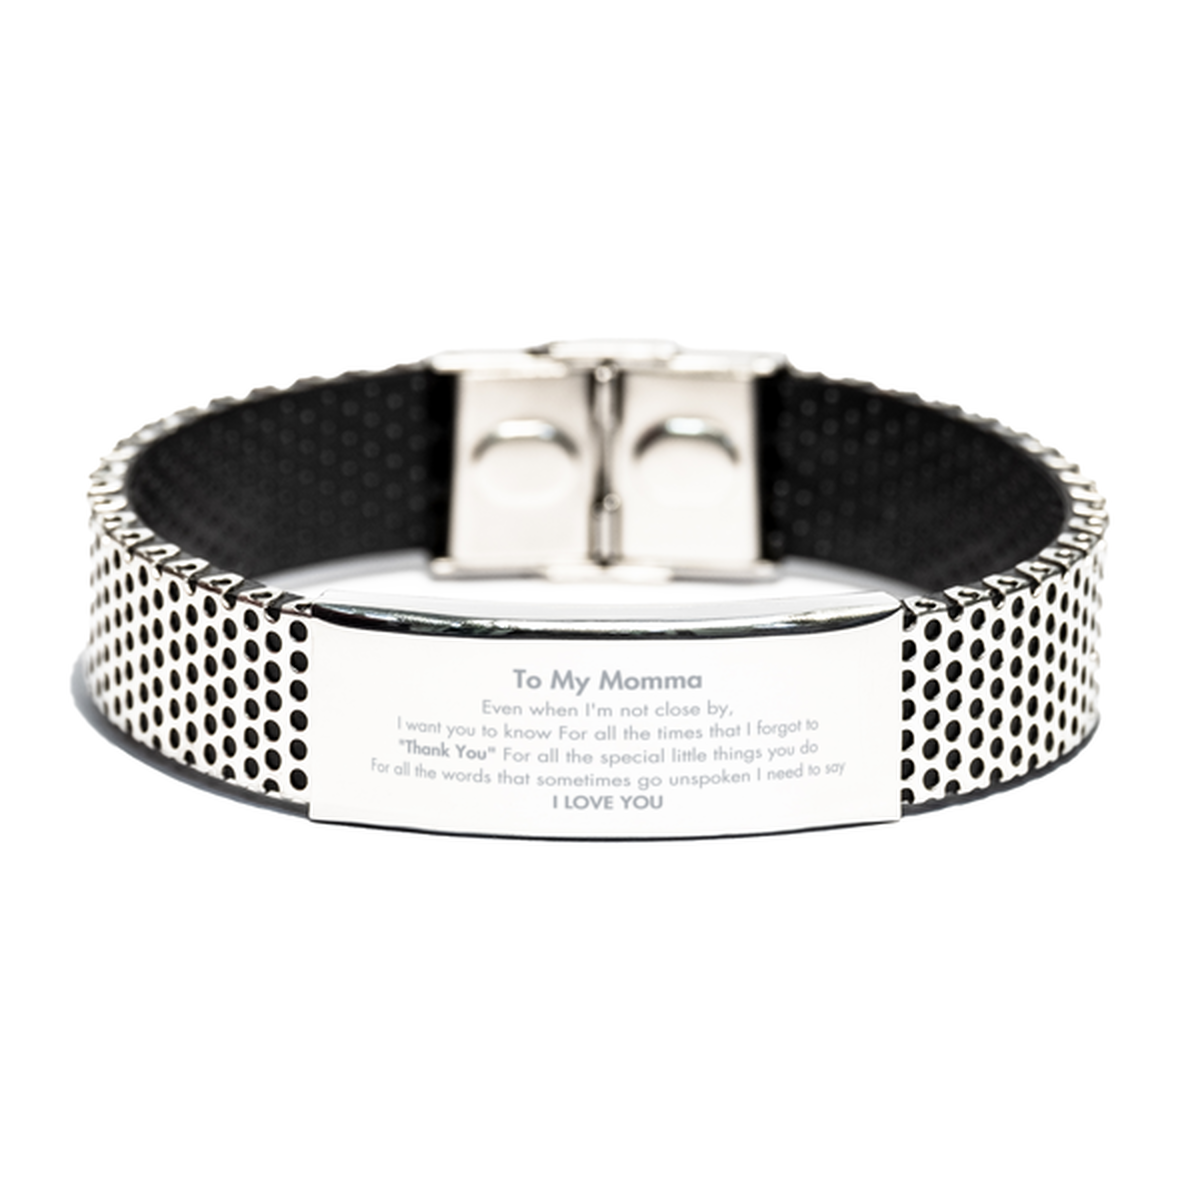 Thank You Gifts for Momma, Keepsake Stainless Steel Bracelet Gifts for Momma Birthday Mother's day Father's Day Momma For all the words That sometimes go unspoken I need to say I LOVE YOU